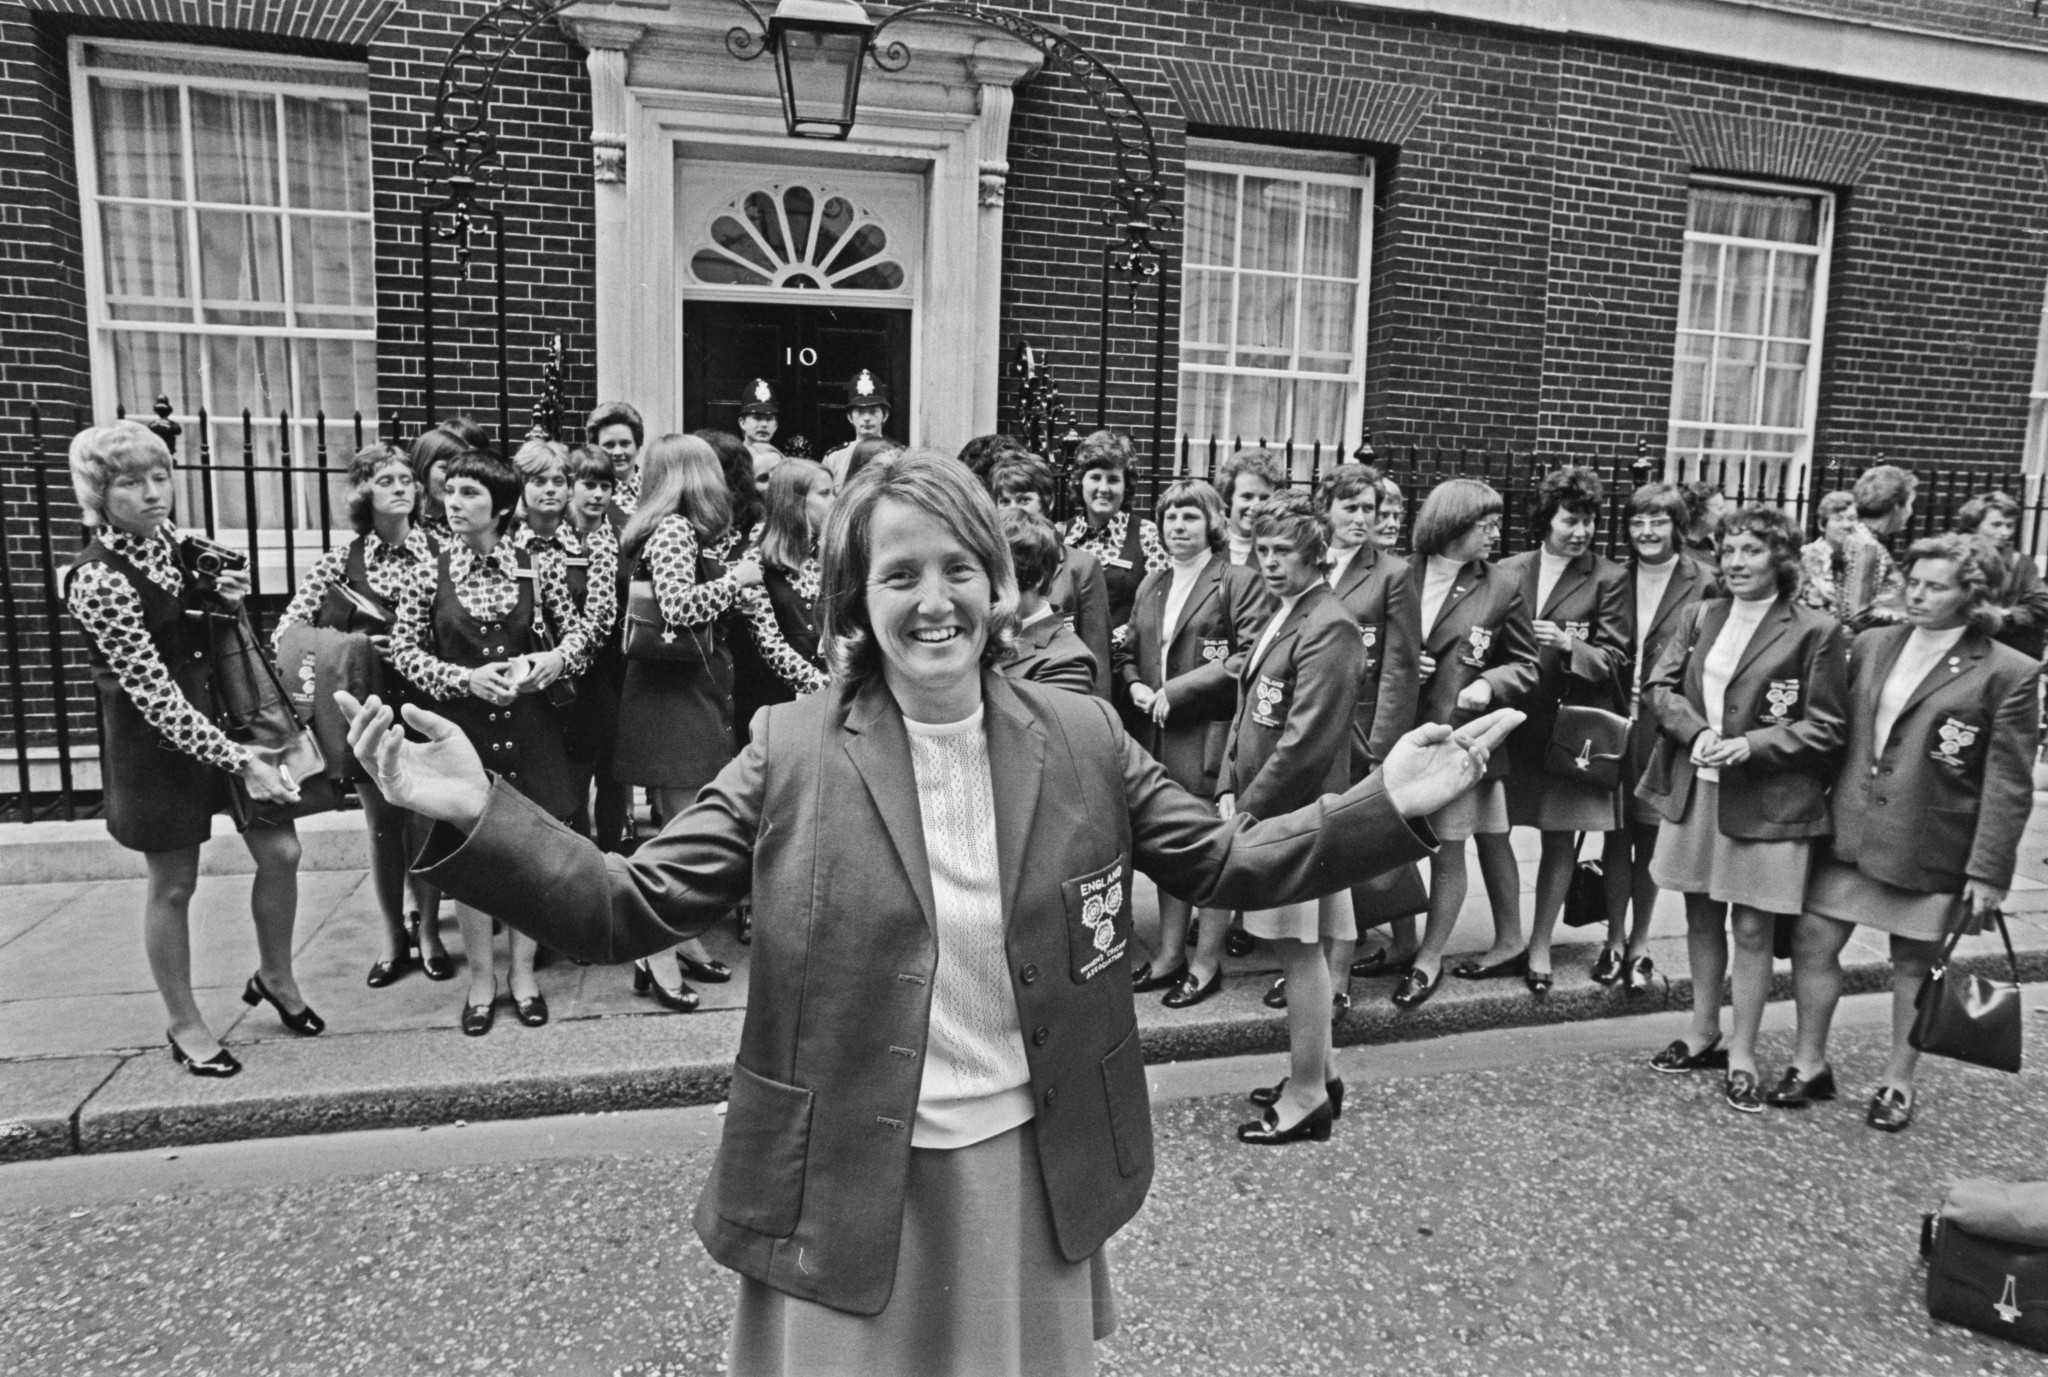 In 1973, women cricketers were invited to number 10 Downing Street to meet the British Prime Minister Ted Heath ©Getty Images